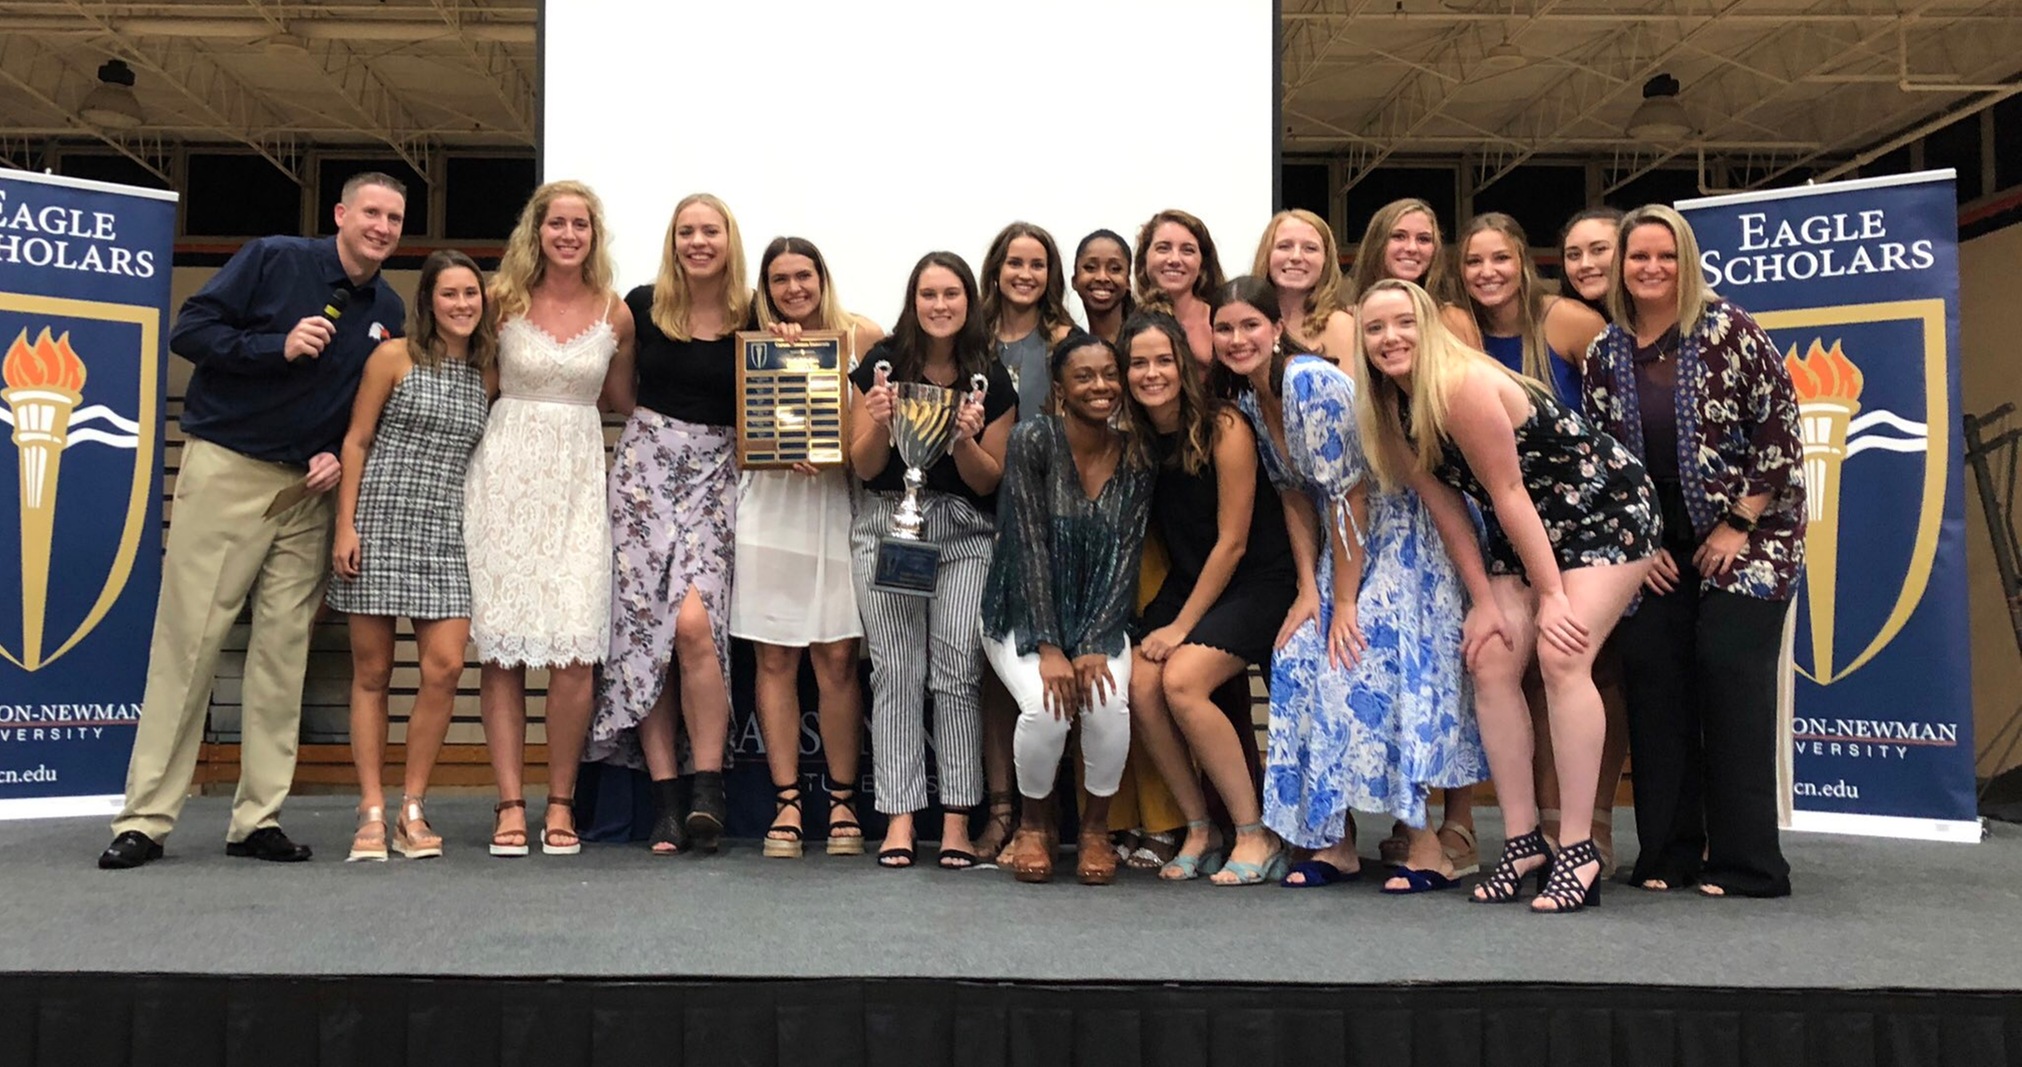 Volleyball brings home Director's Cup, record number of student-athletes honored at Eagle Scholars Ceremony